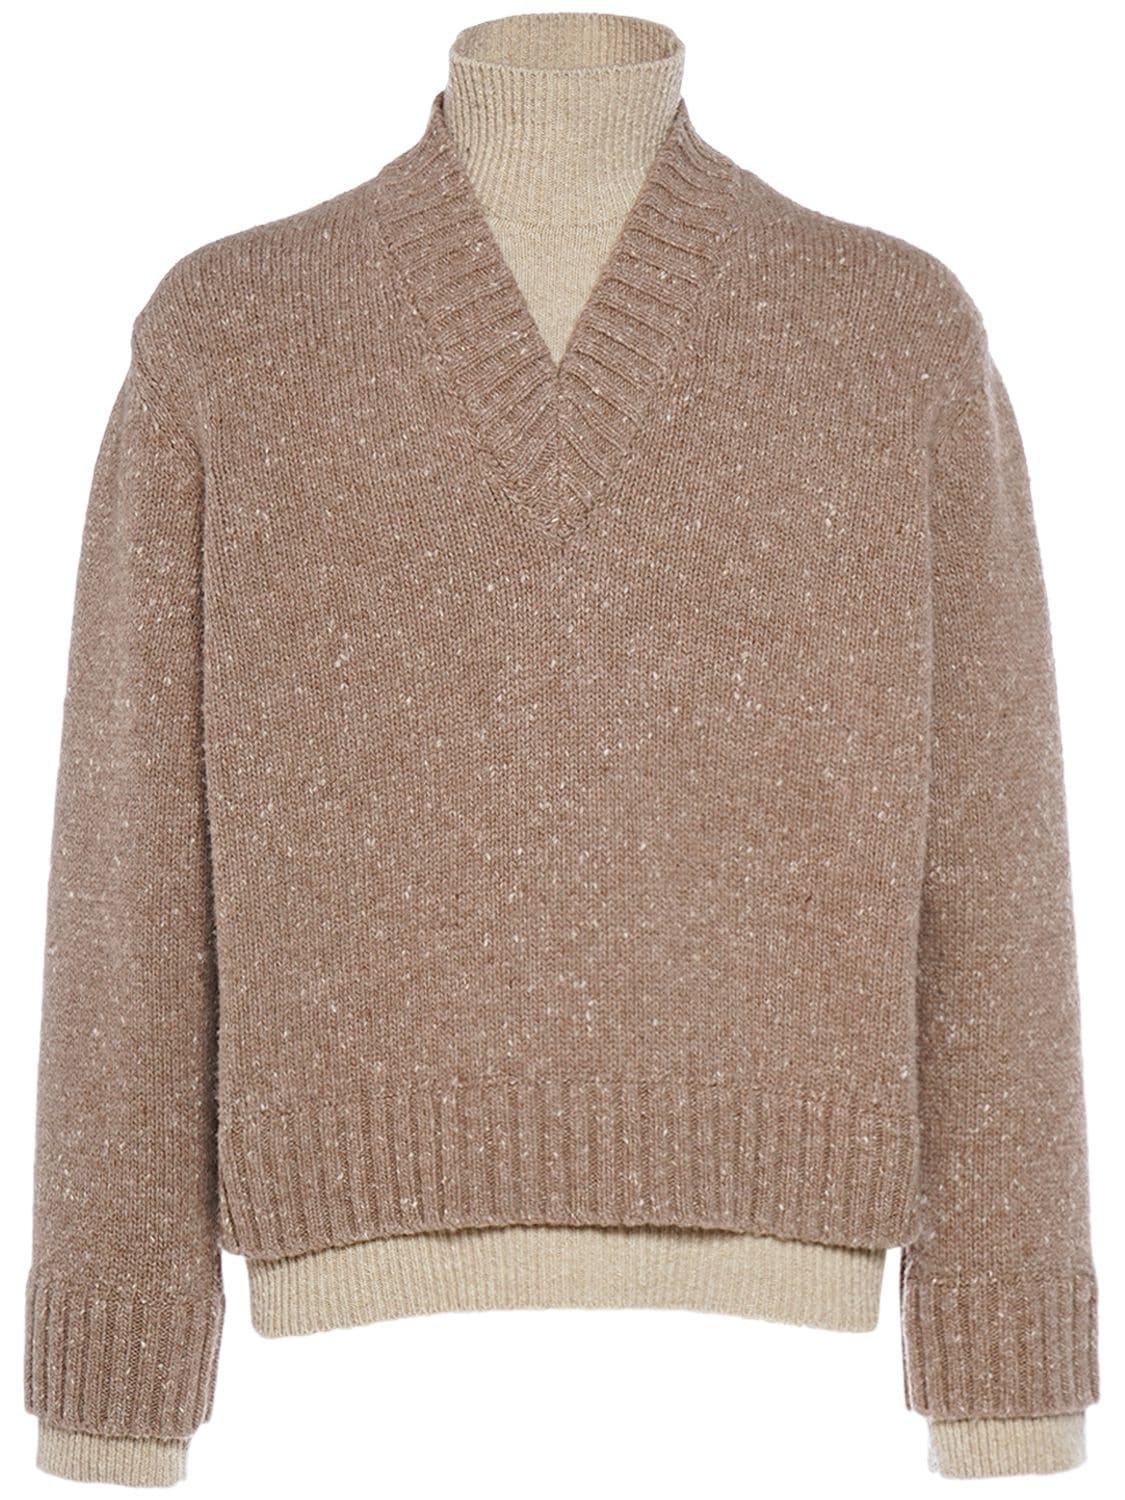 Image of Double Layer Wool Knit Sweater